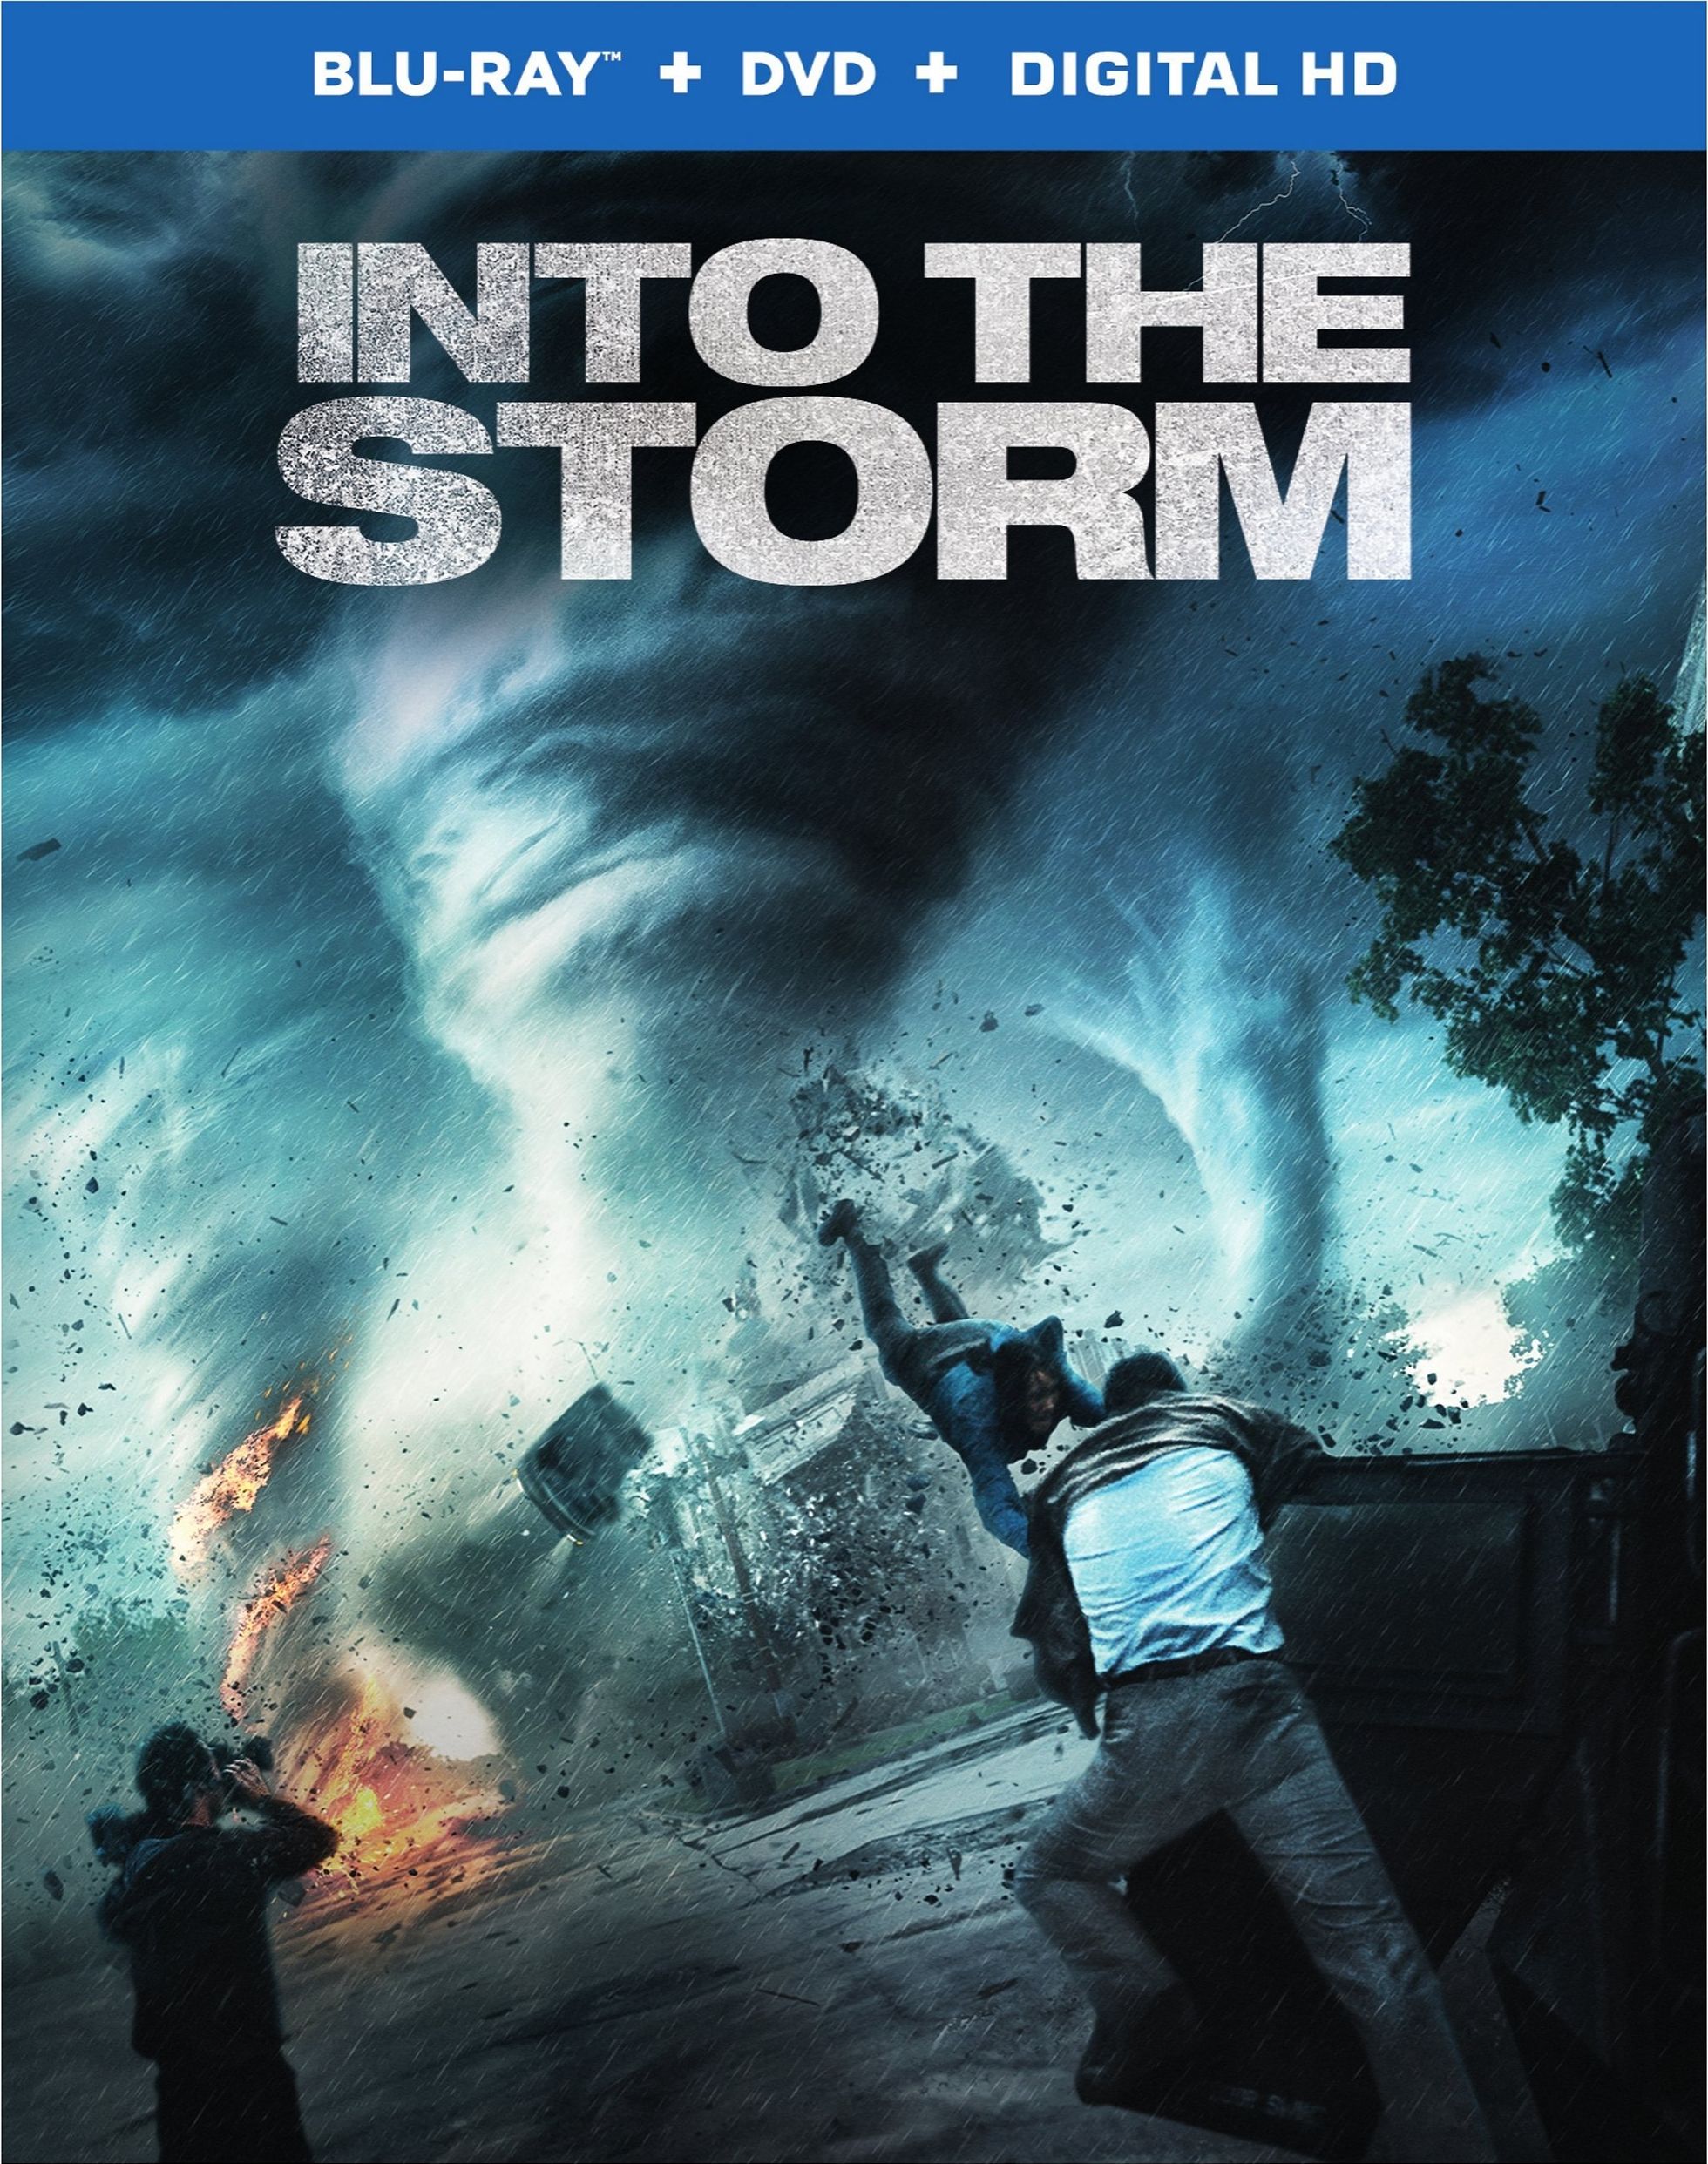 49 Top Images Into The Storm Movie Churchill / Into the Storm - Churchills Monologue (2009) - YouTube